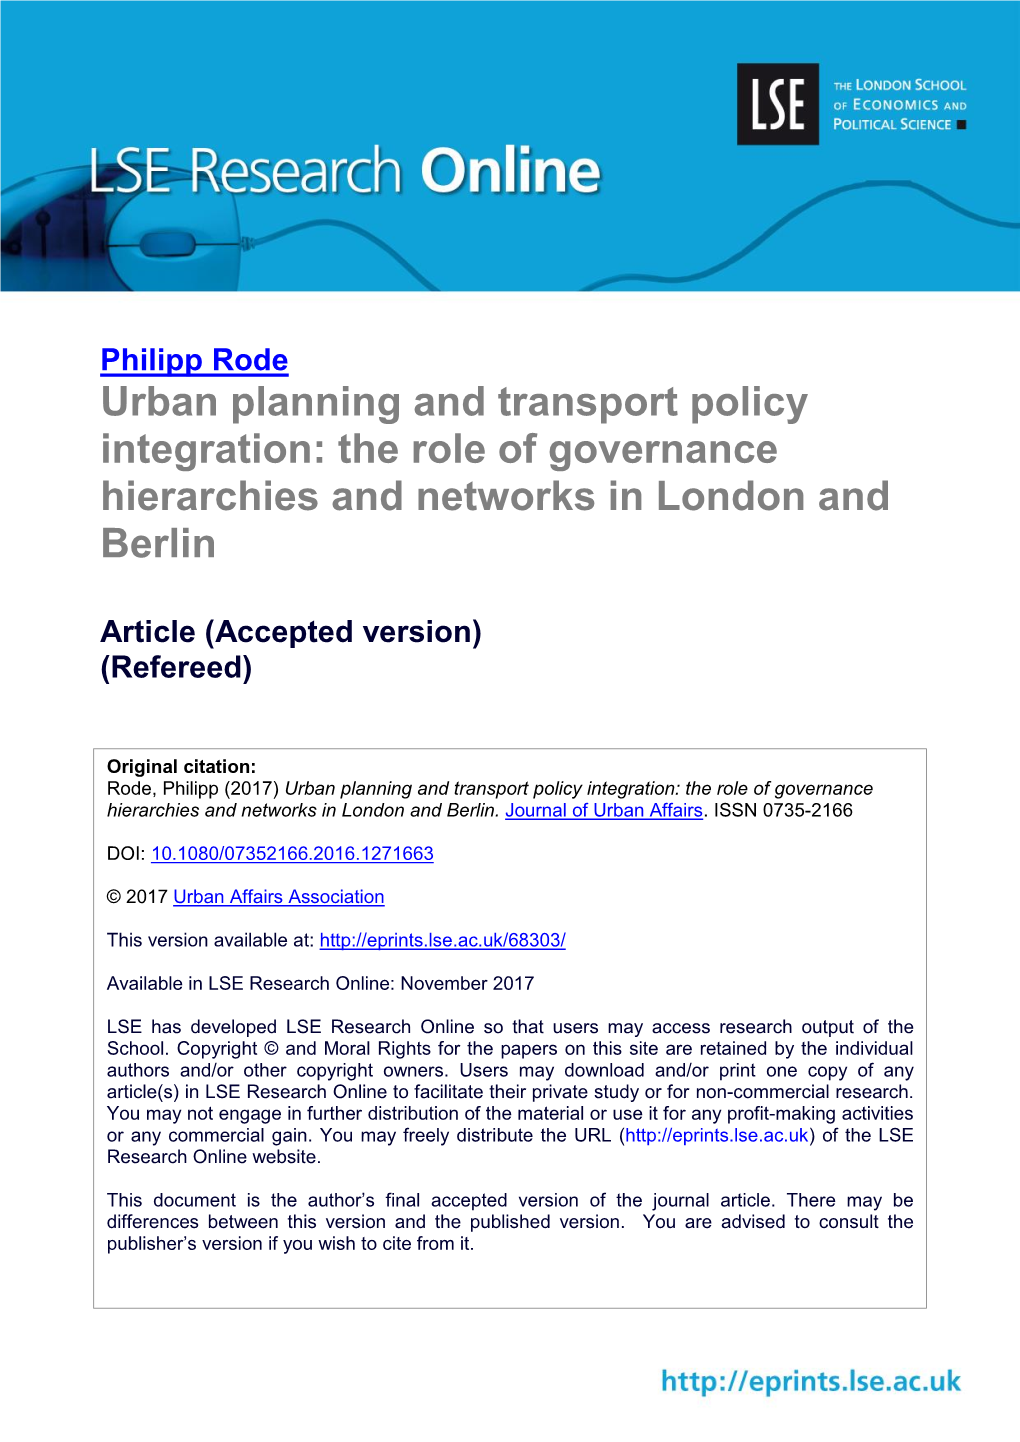 Urban Planning and Transport Policy Integration: the Role of Governance Hierarchies and Networks in London and Berlin